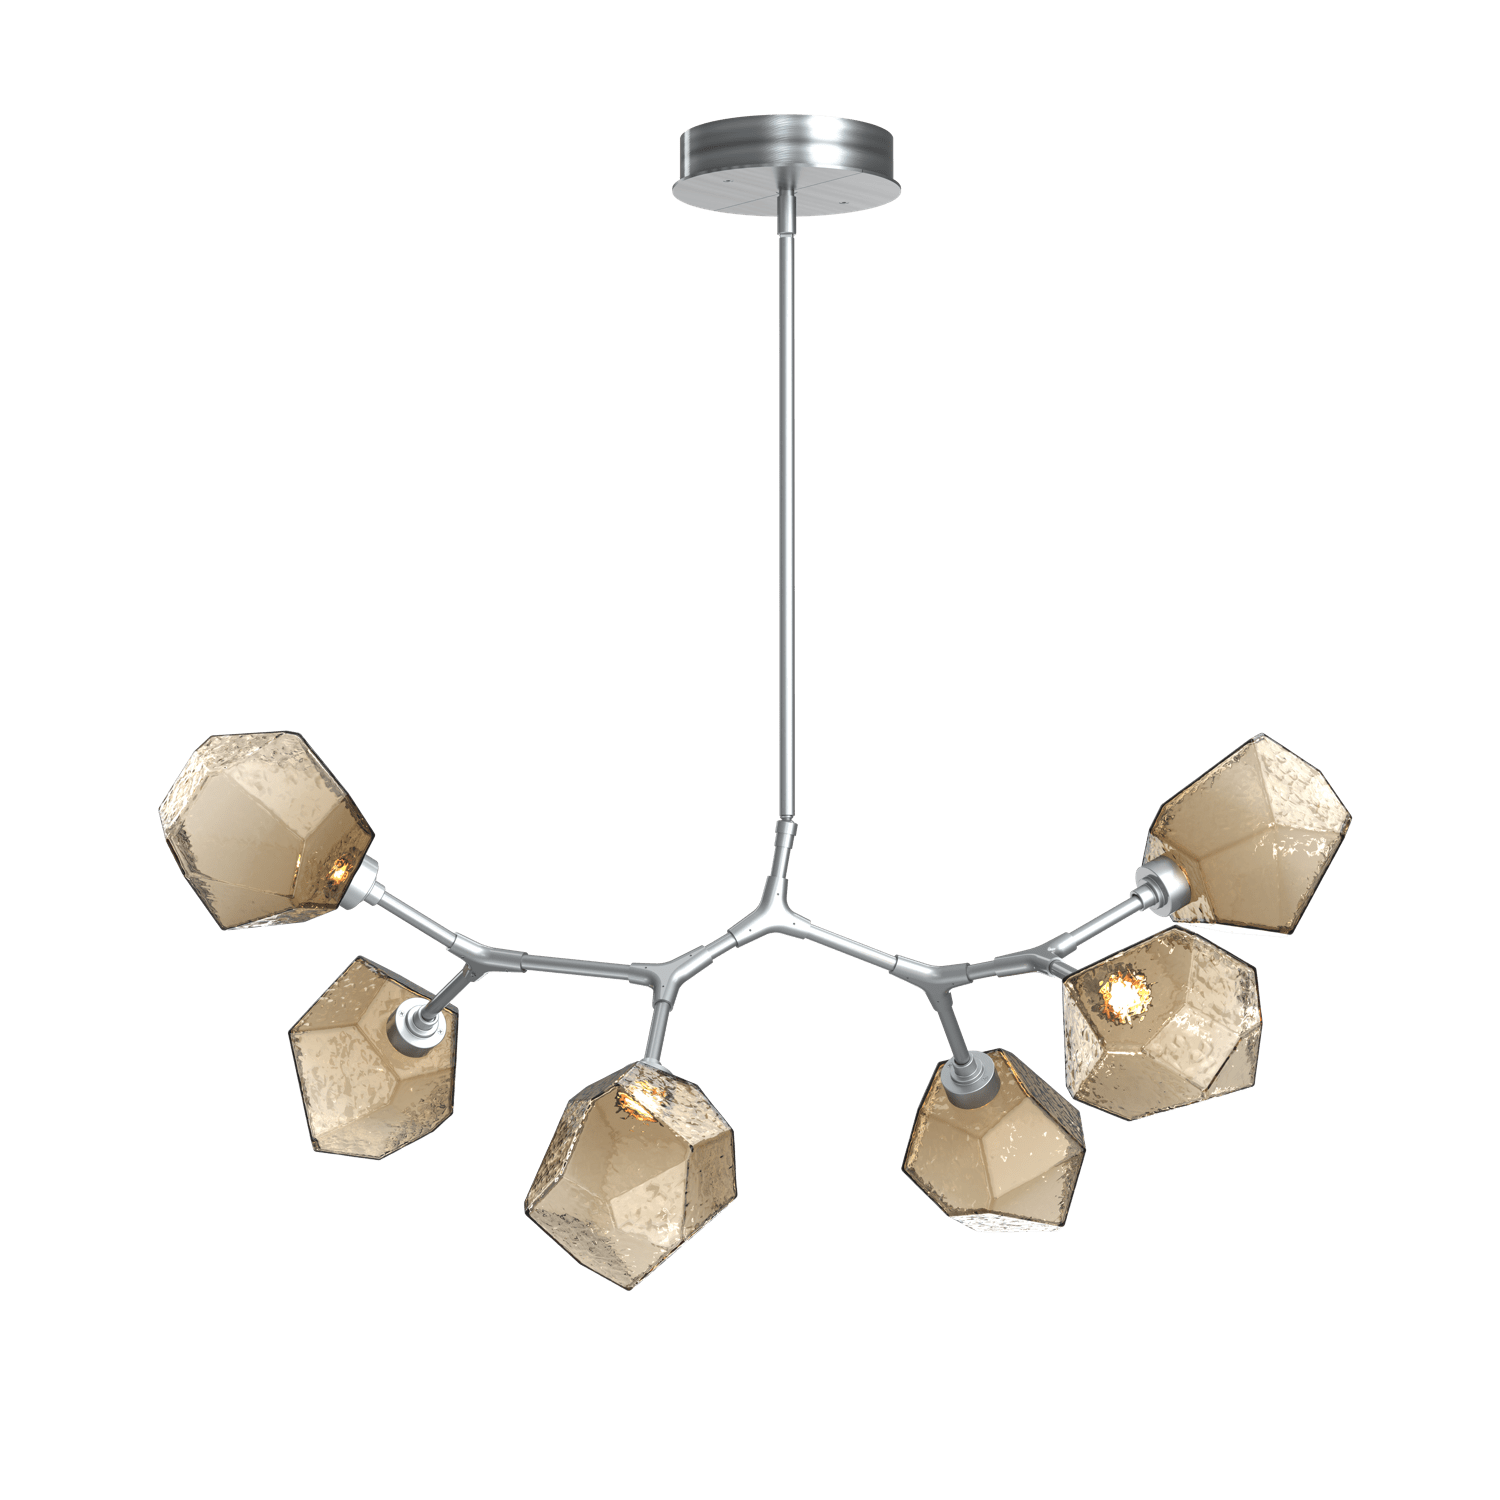 PLB0039-BA-SN-B-Hammerton-Studio-Gem-6-light-modern-branch-chandelier-with-satin-nickel-finish-and-bronze-blown-glass-shades-and-LED-lamping